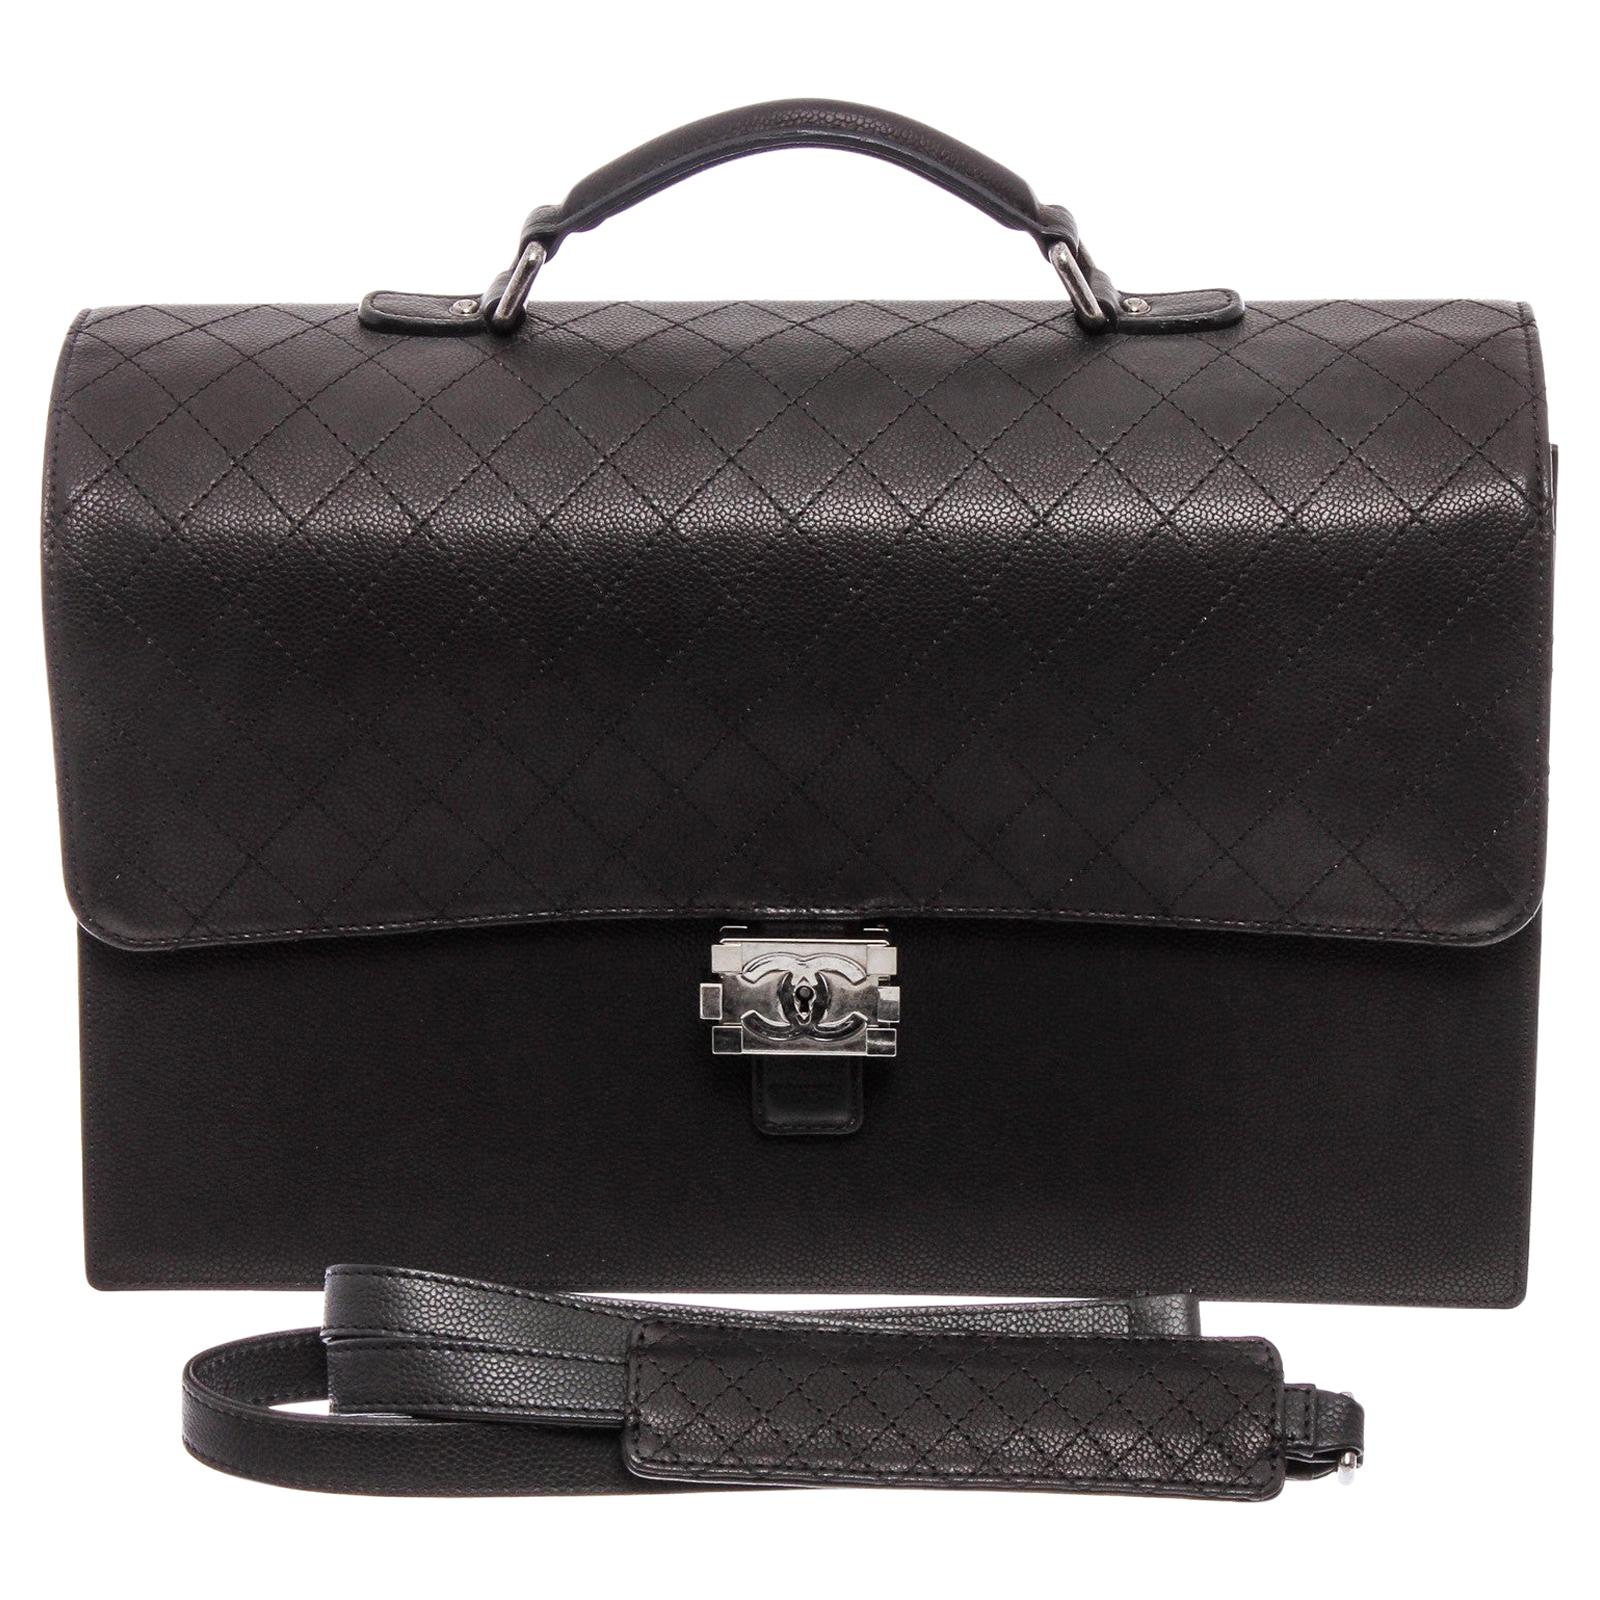 Chanel Black Leather Carryall Business Top Handle Travel Brief Briefcase Bag III